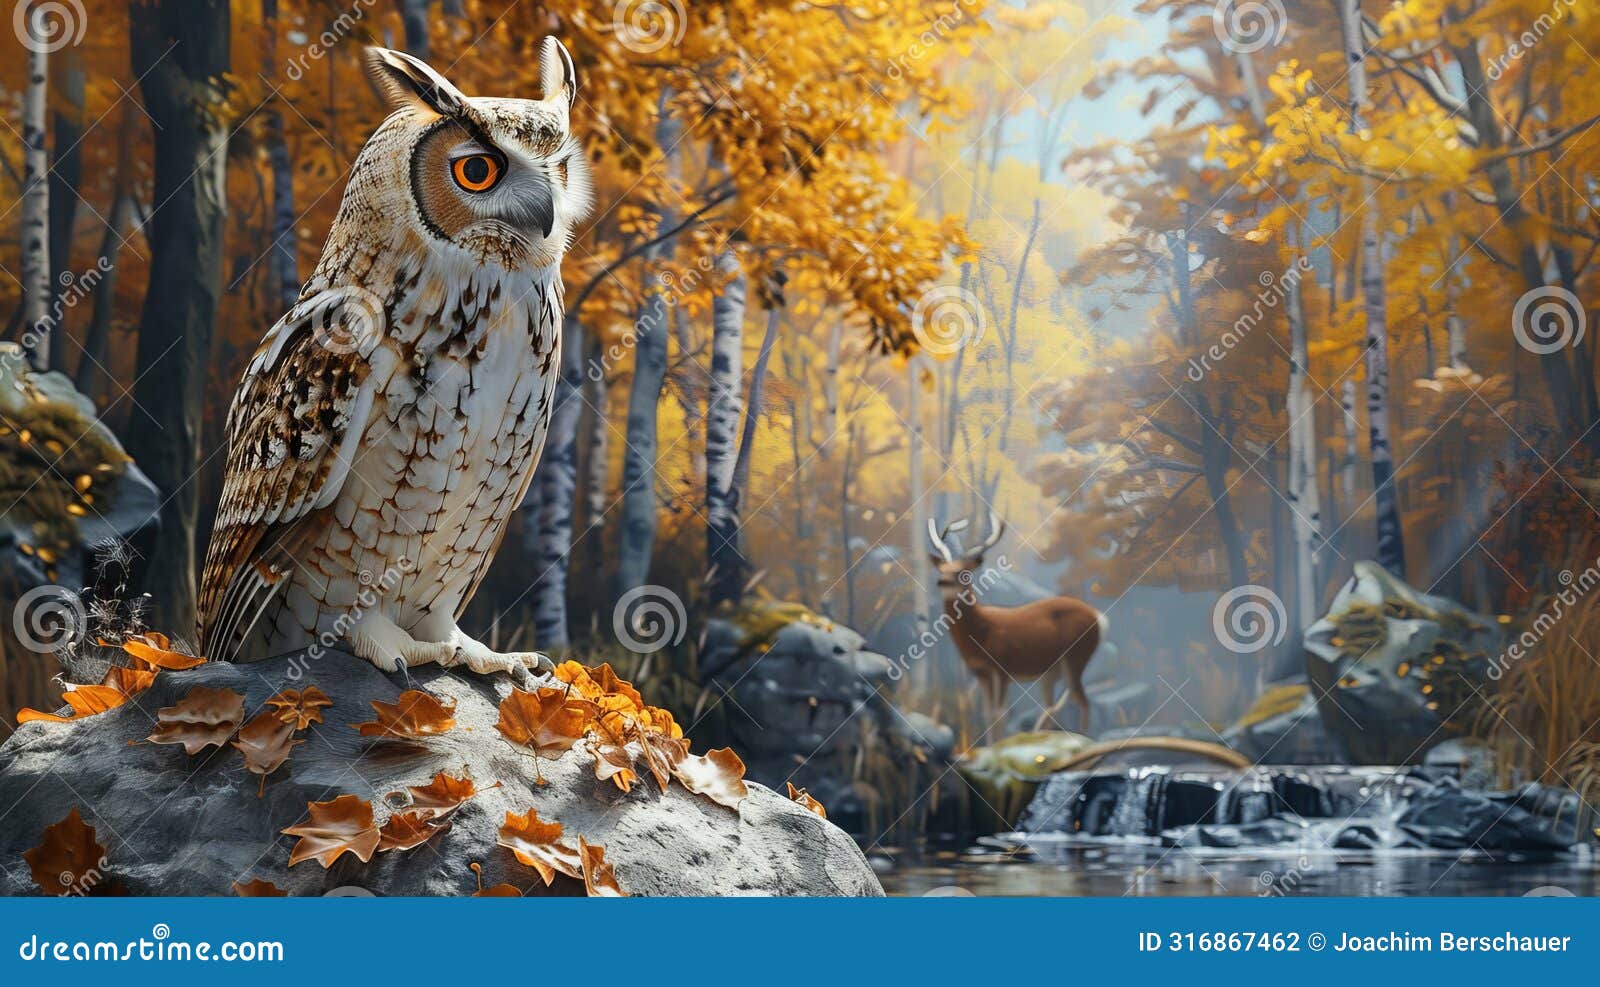 hyperrealistic tree owl painting with detailed habitat, deer, and realistic lighting